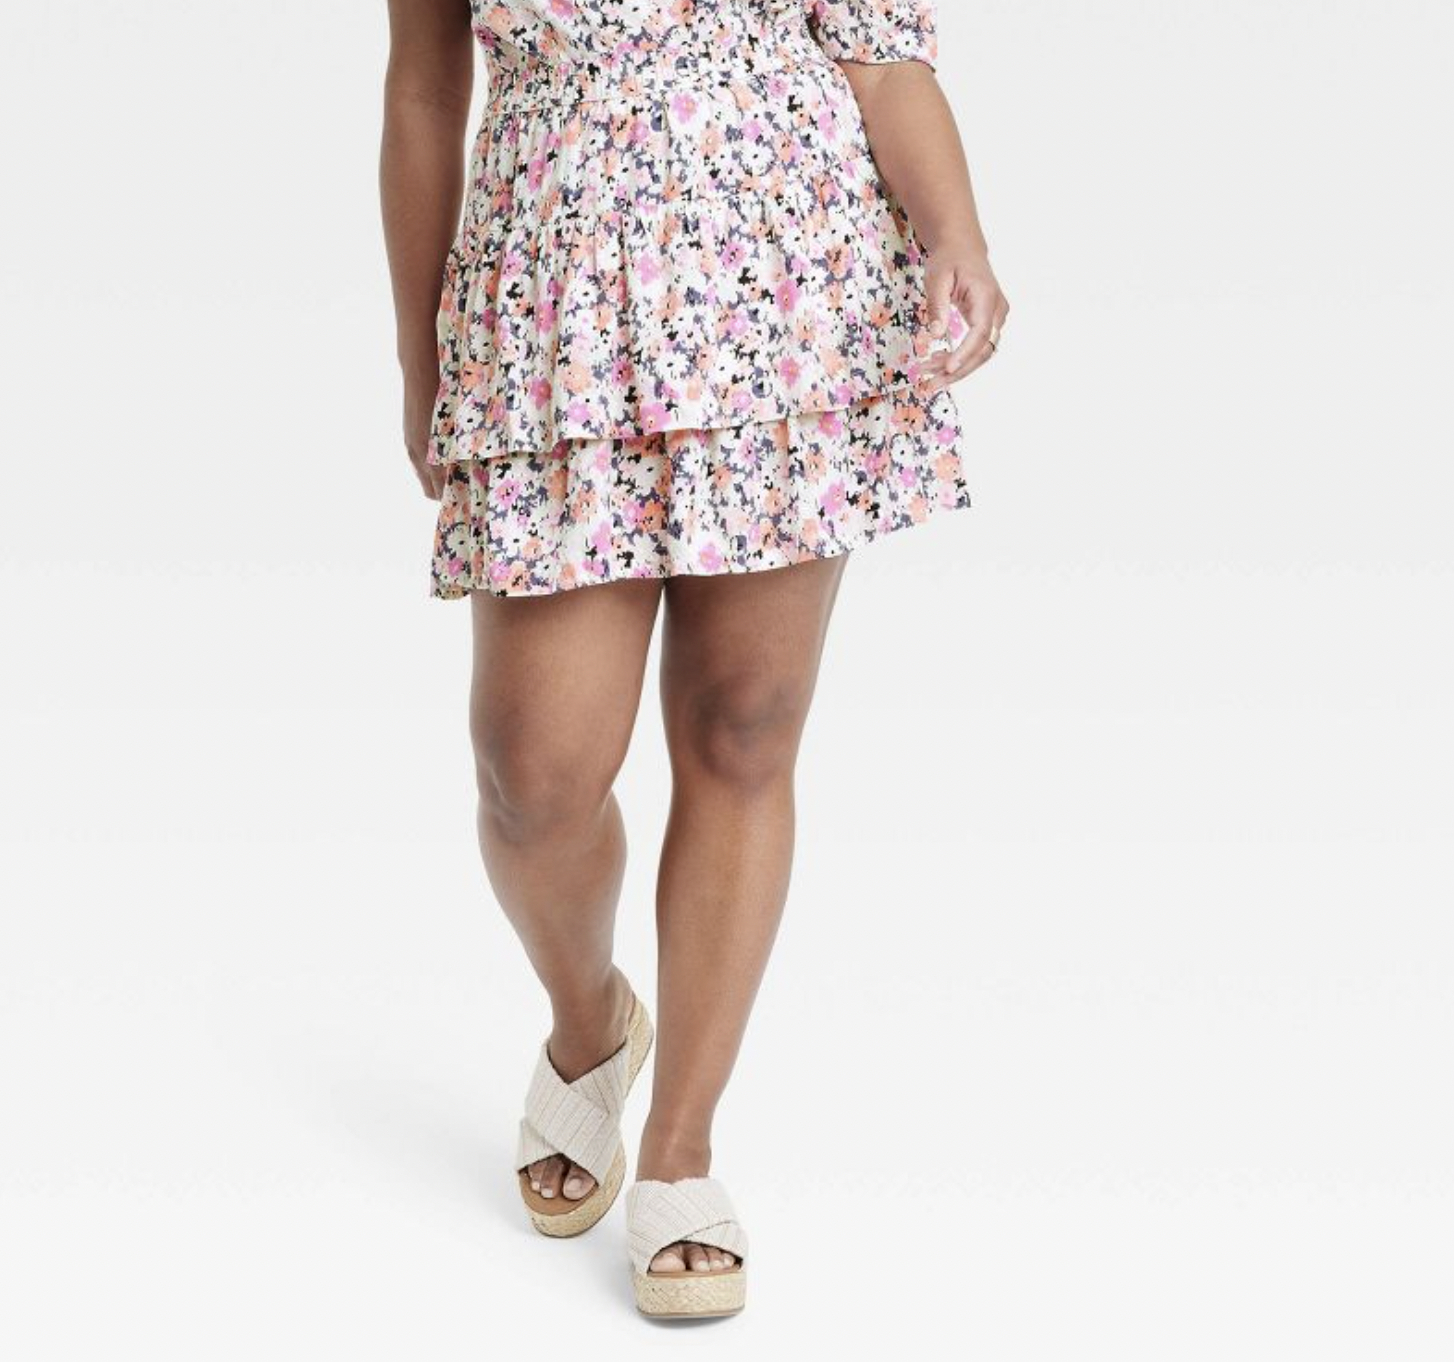 model wearing the floral dress